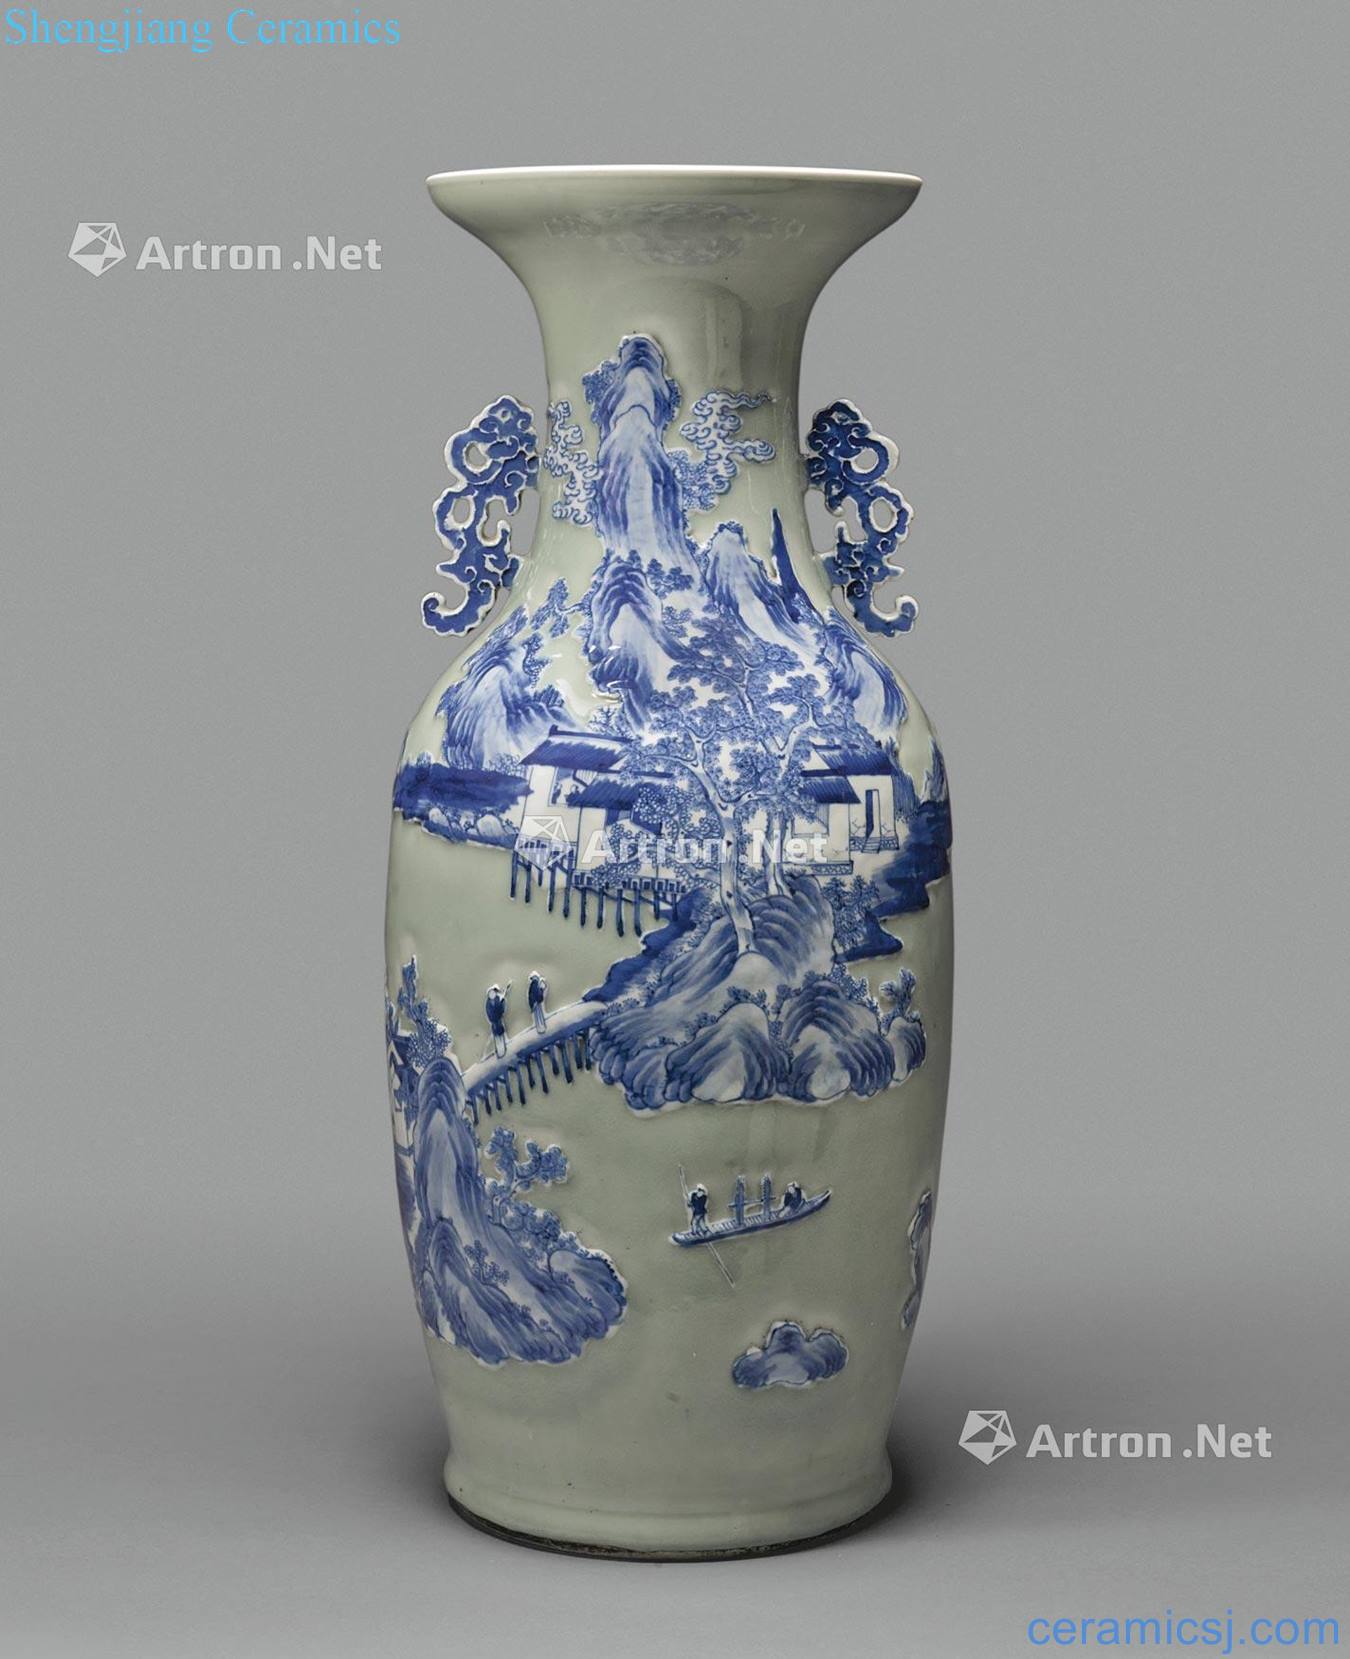 Qing dynasty in the 19th century Pea green to blue and white vase with a pile of white characters and grain dragon